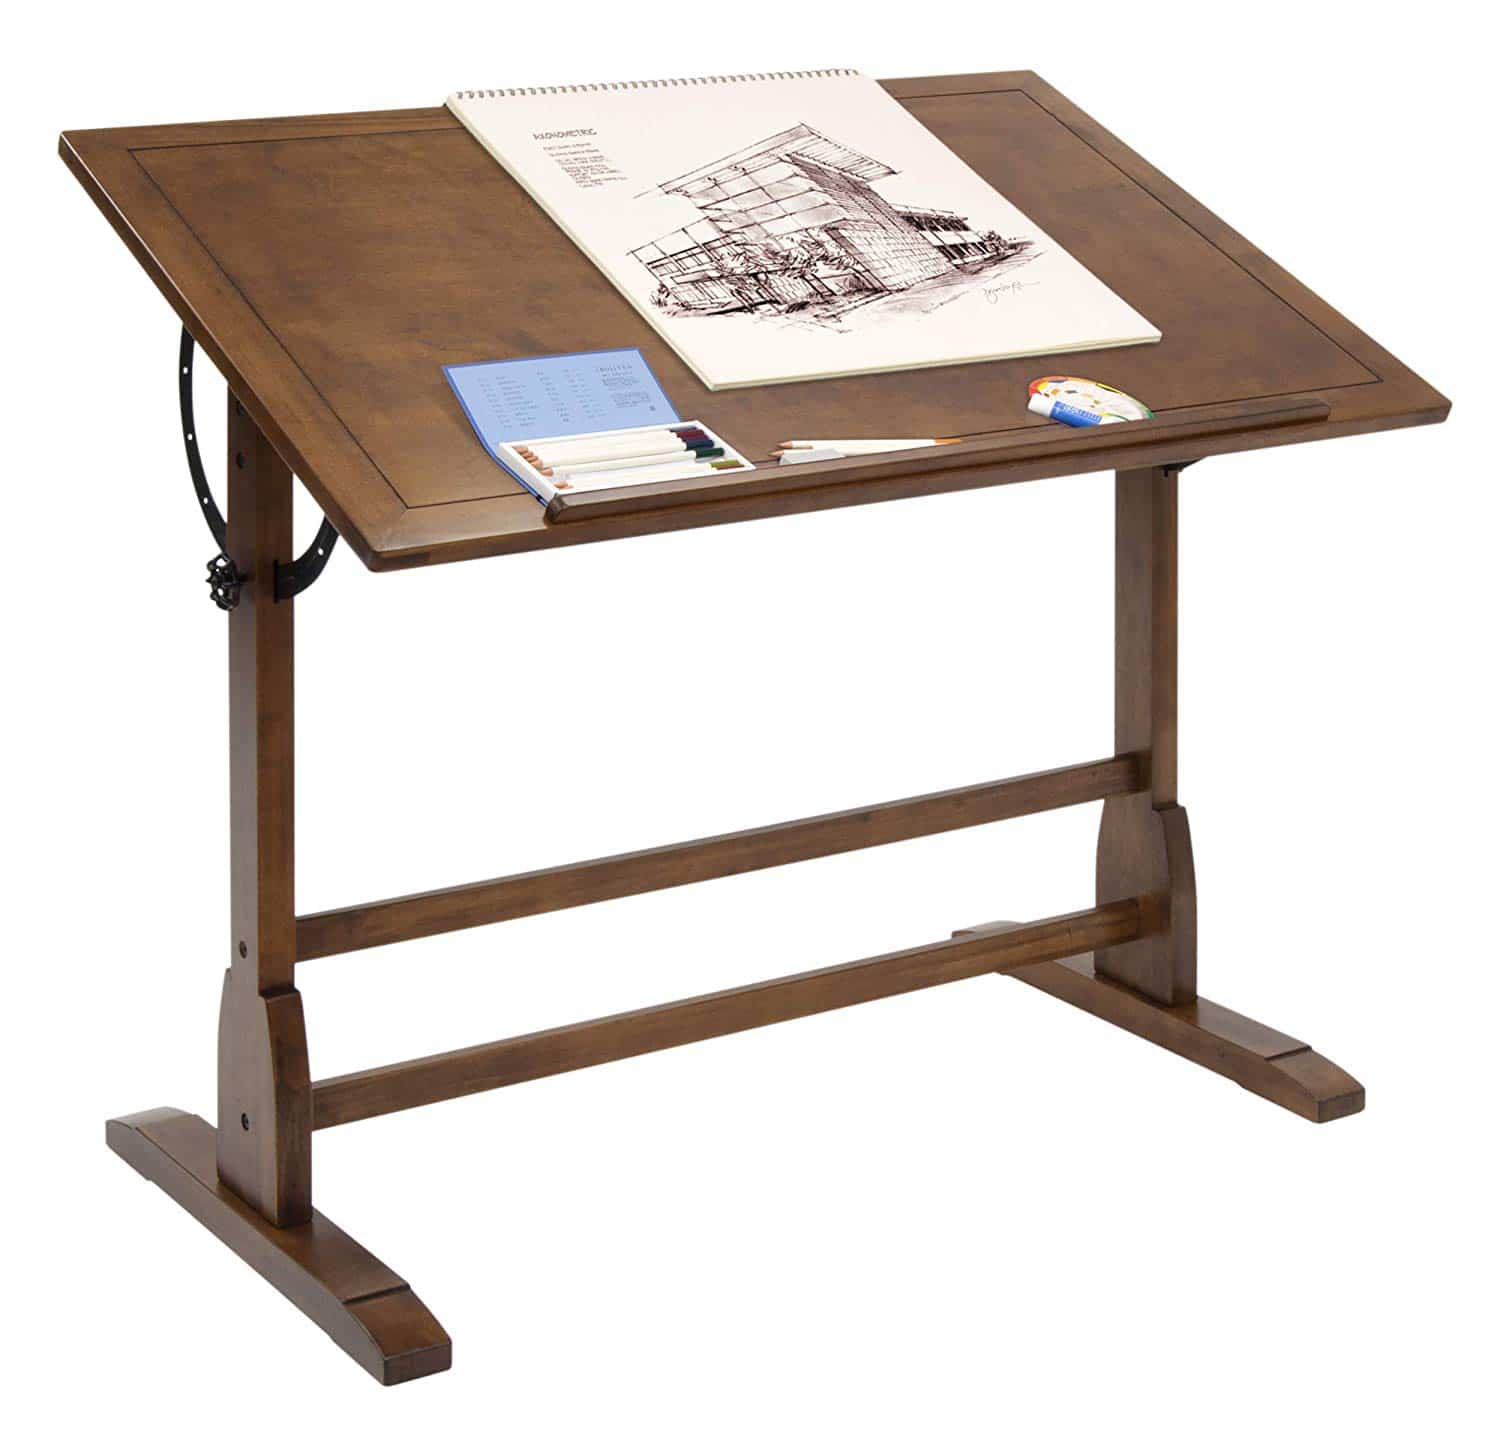 Top 10 Best Drafting Tables for Architects in 2021 Reviews | Buyer's Guide